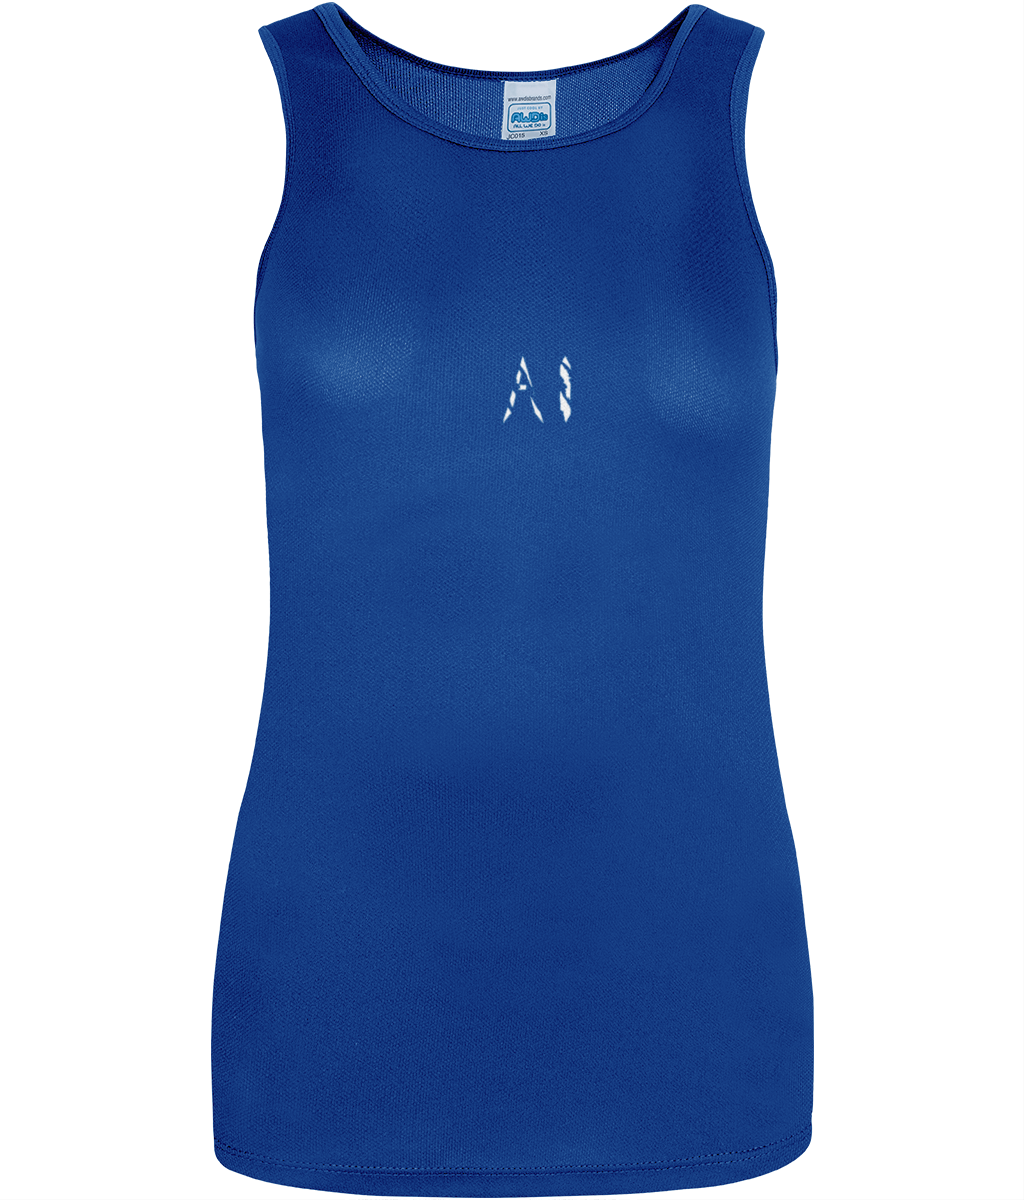 Womens blue Workout Sports Vest with white AI logo in centre chest